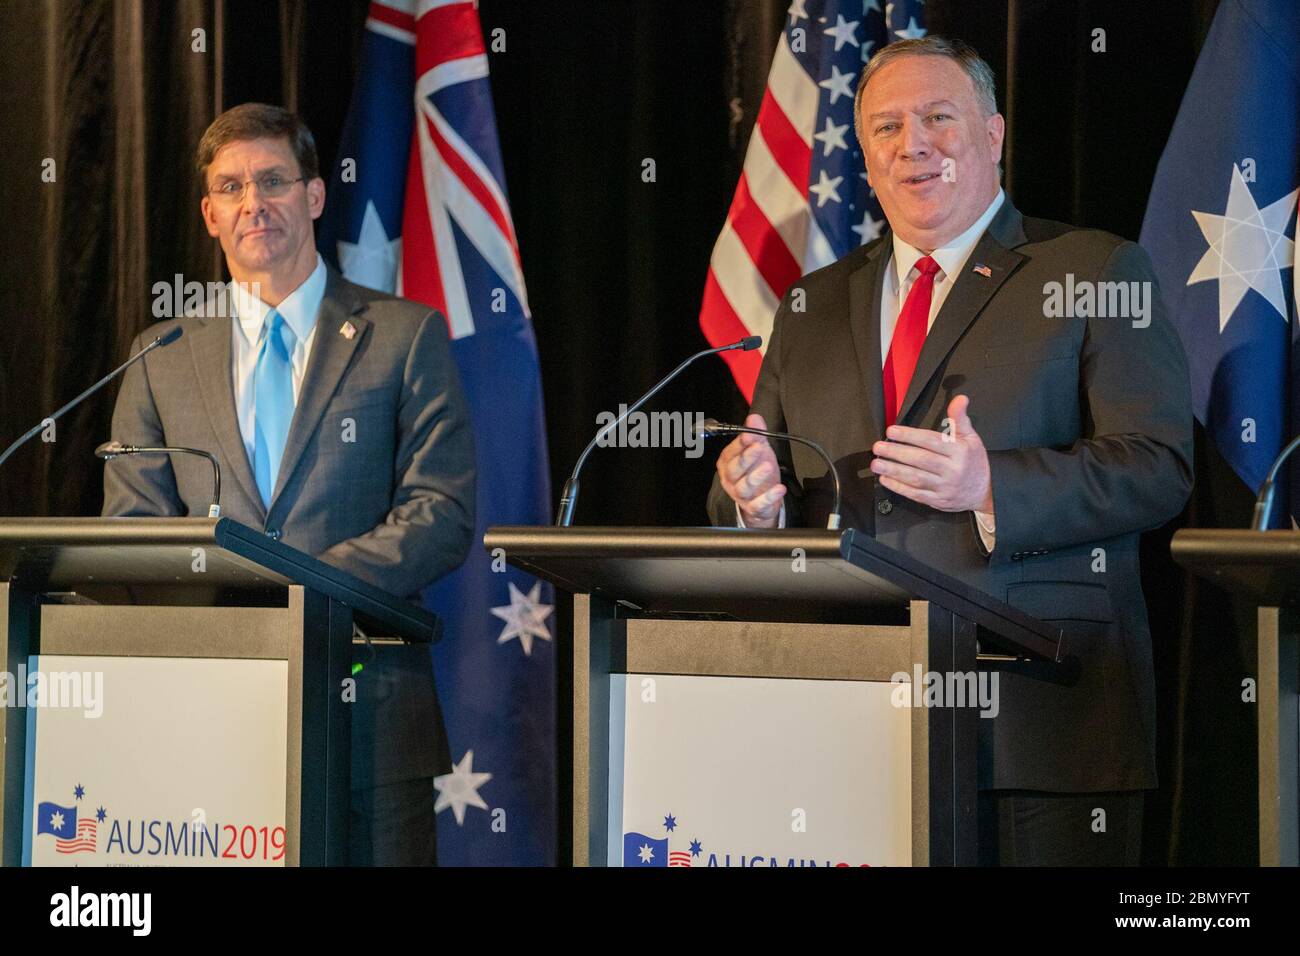 Secretary Pompeo Participates in a Joint Press Conference U.S. Secretary of State Michael R. Pompeo participates in a joint press conference with Australian Foreign Minister Marise Payne, Australian Defence Minster Linda Reynolds, and U.S. Secretary of Defense Mark Esper in Sydney, Australia on August 4, 2019. Stock Photo